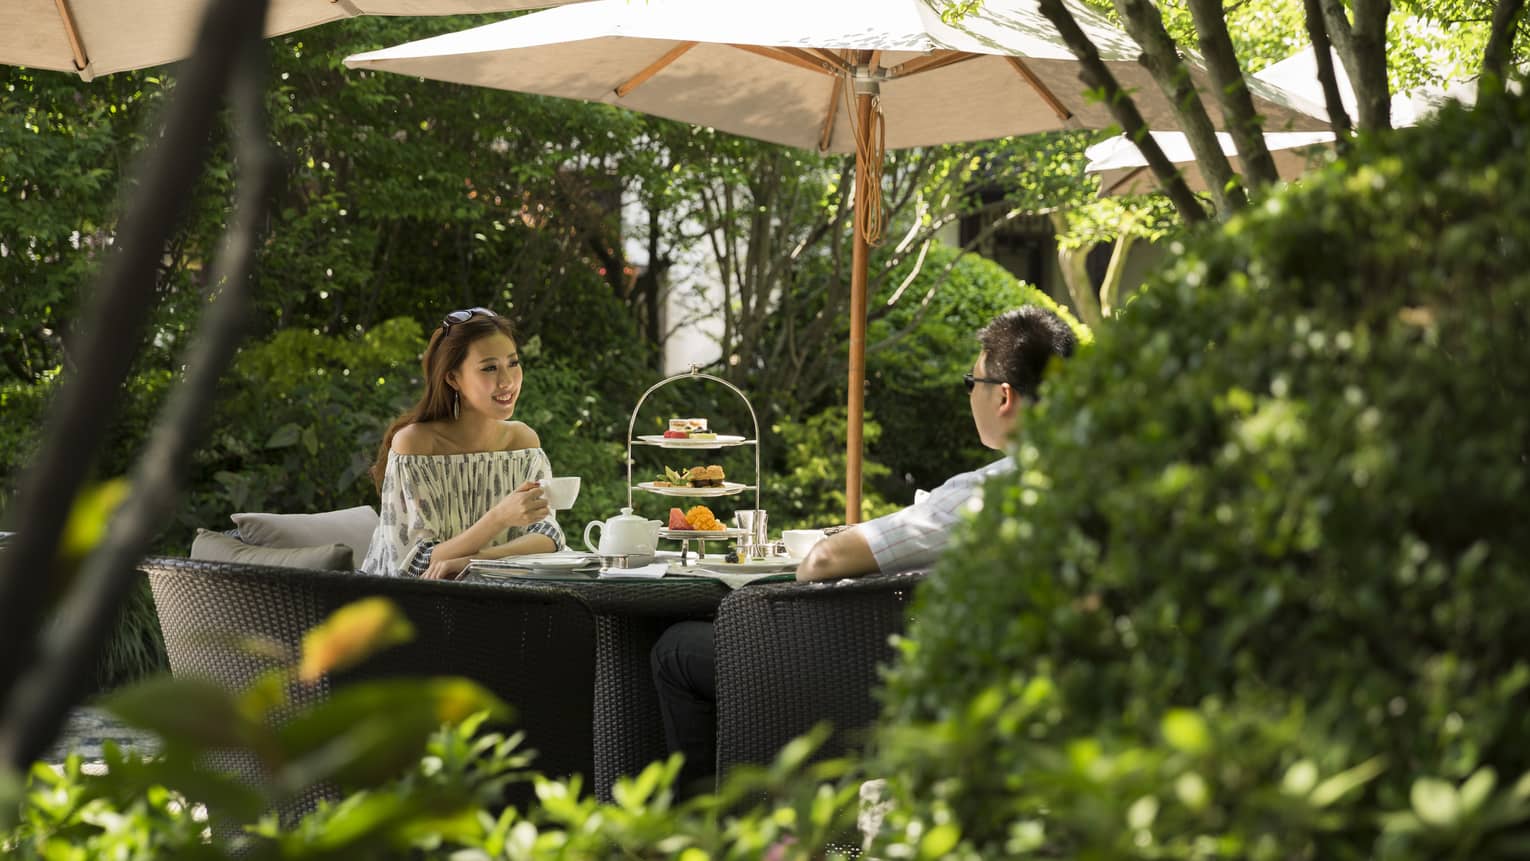 Woman and man drink tea near tray of sweets at table under shade of patio umbrella